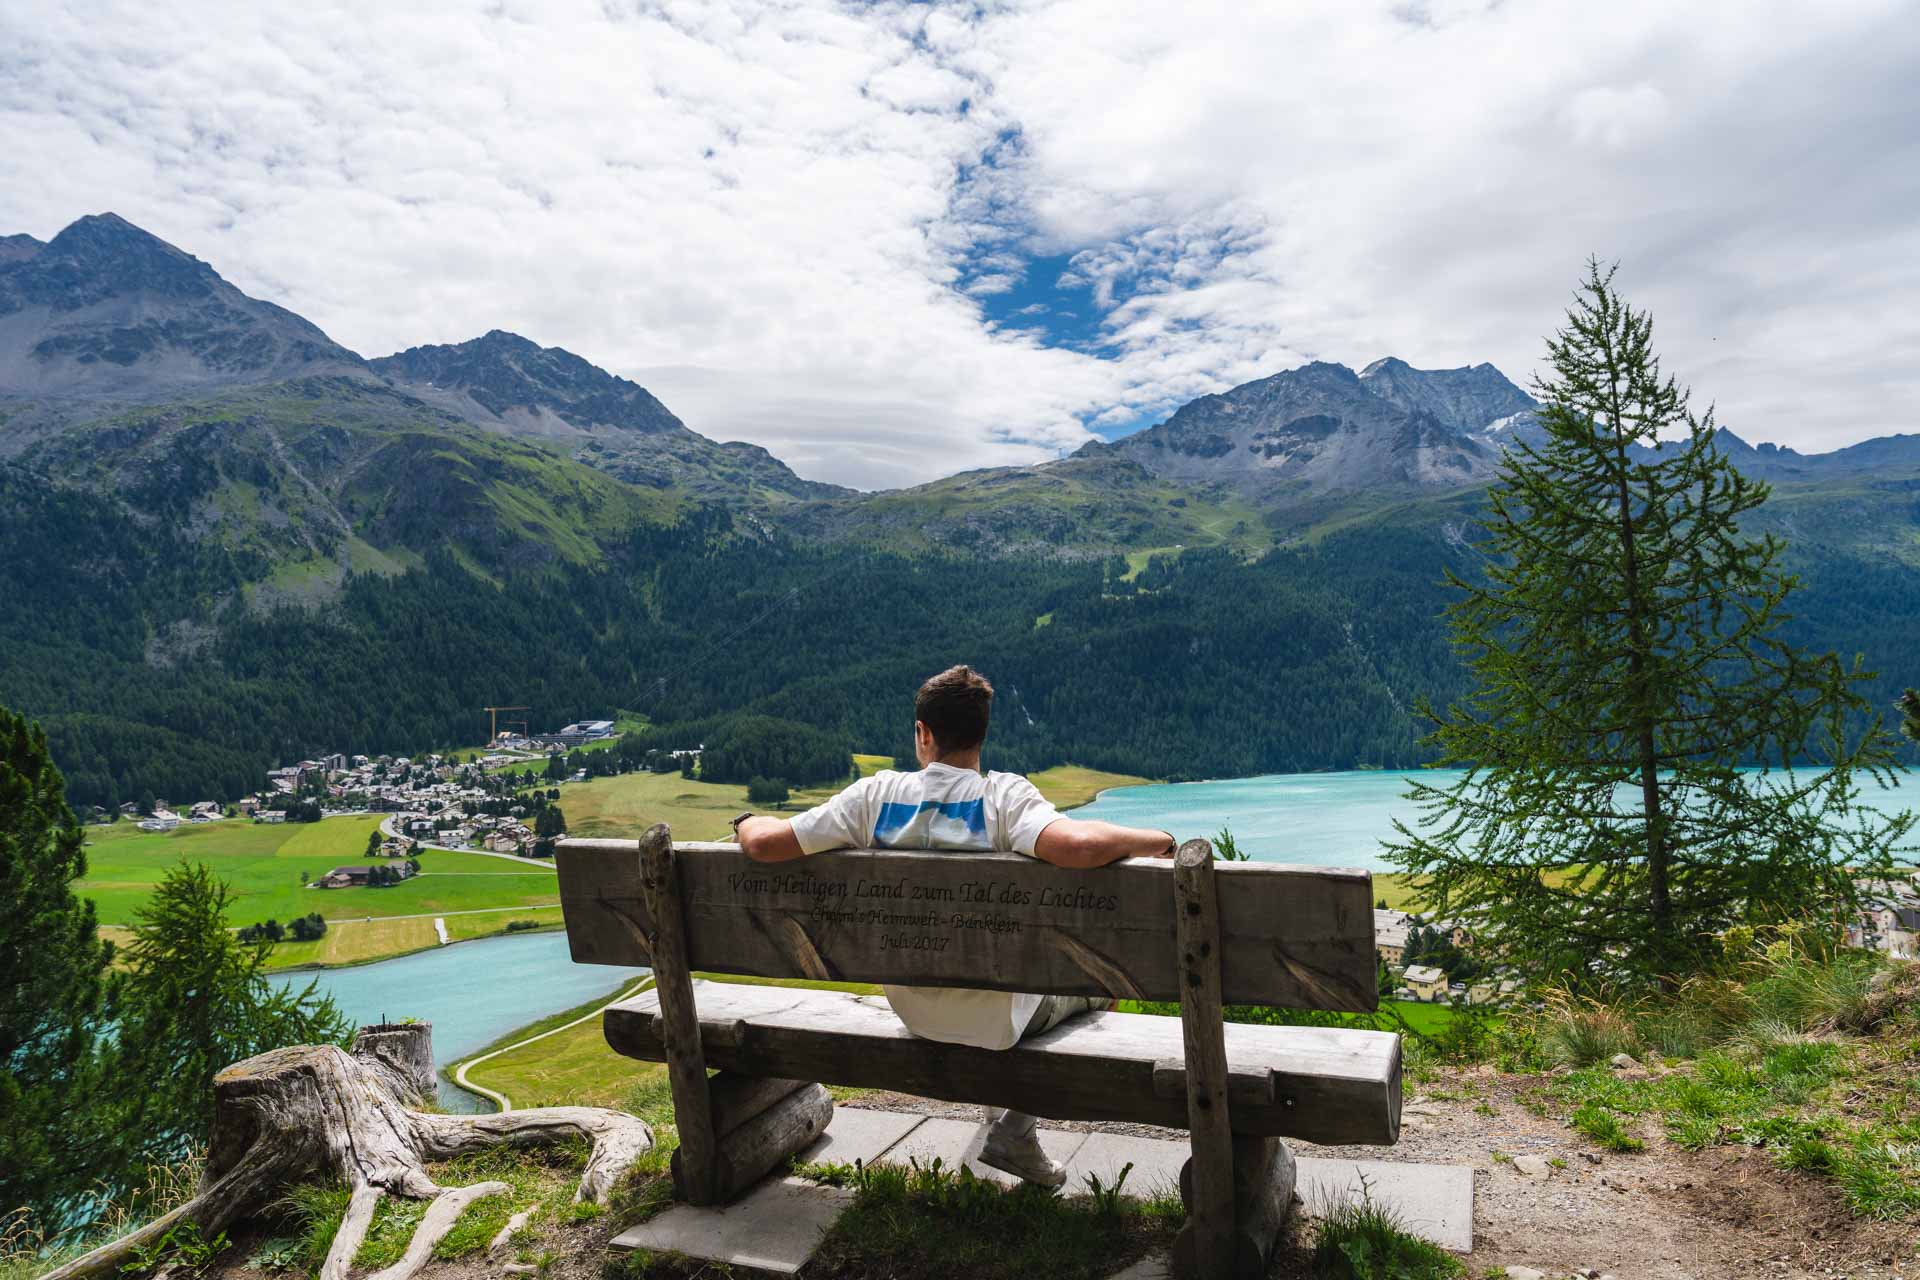 Ryan sitting on a wooden bench in the Swiss mountains overlooking the baby-blue Silverplana Lake.